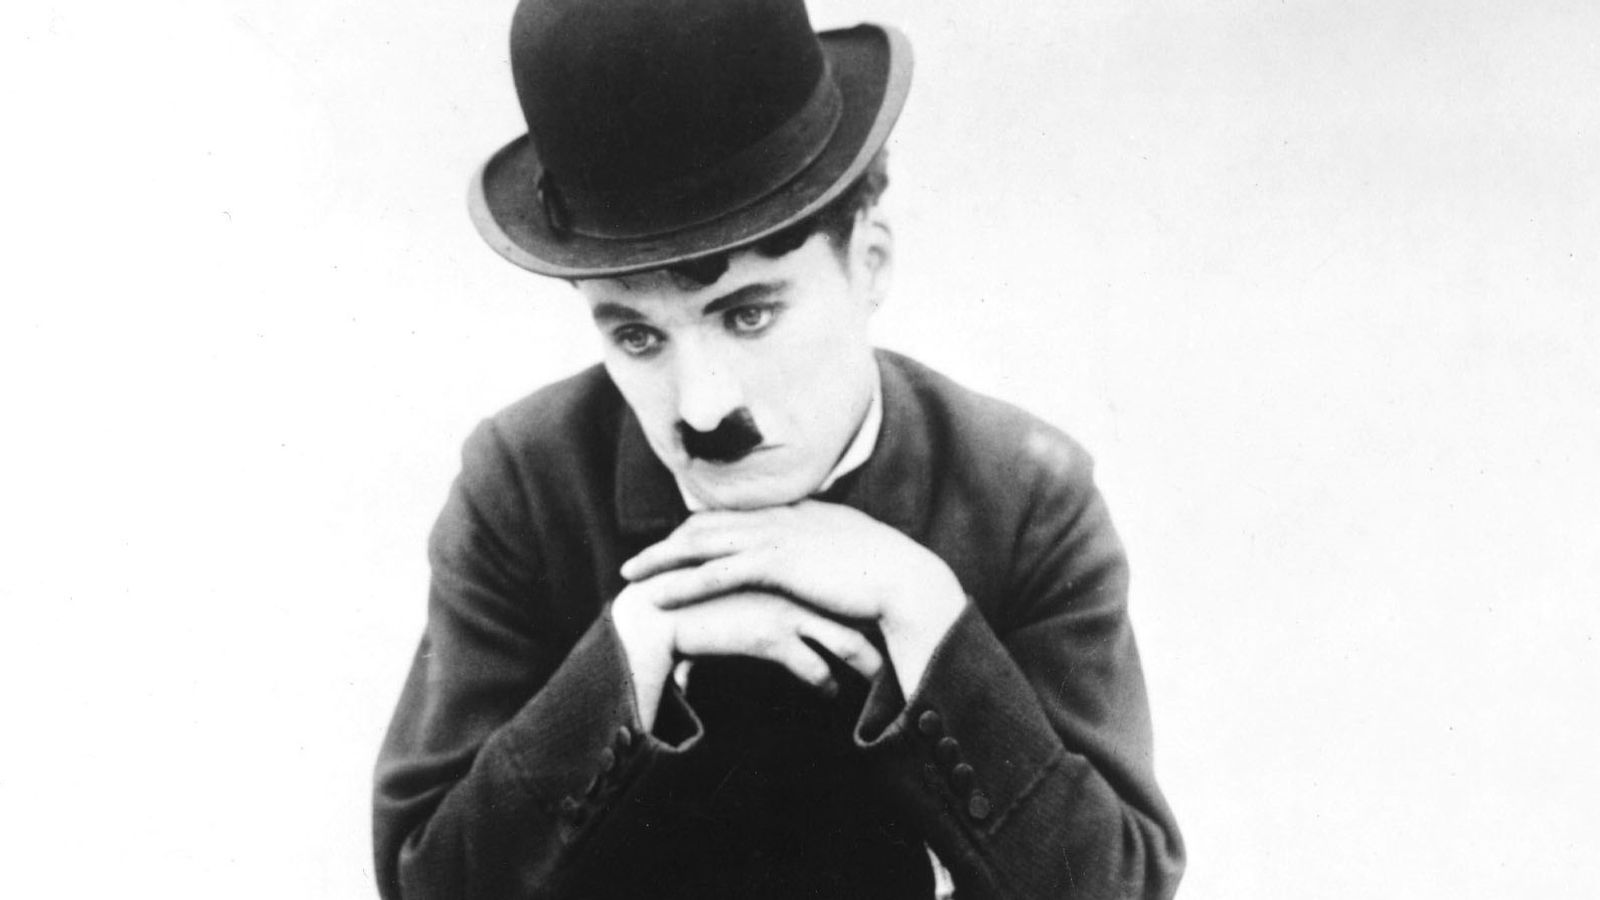 New documentary portrays Charlie Chaplin's 'complicated' relationships with teen wives